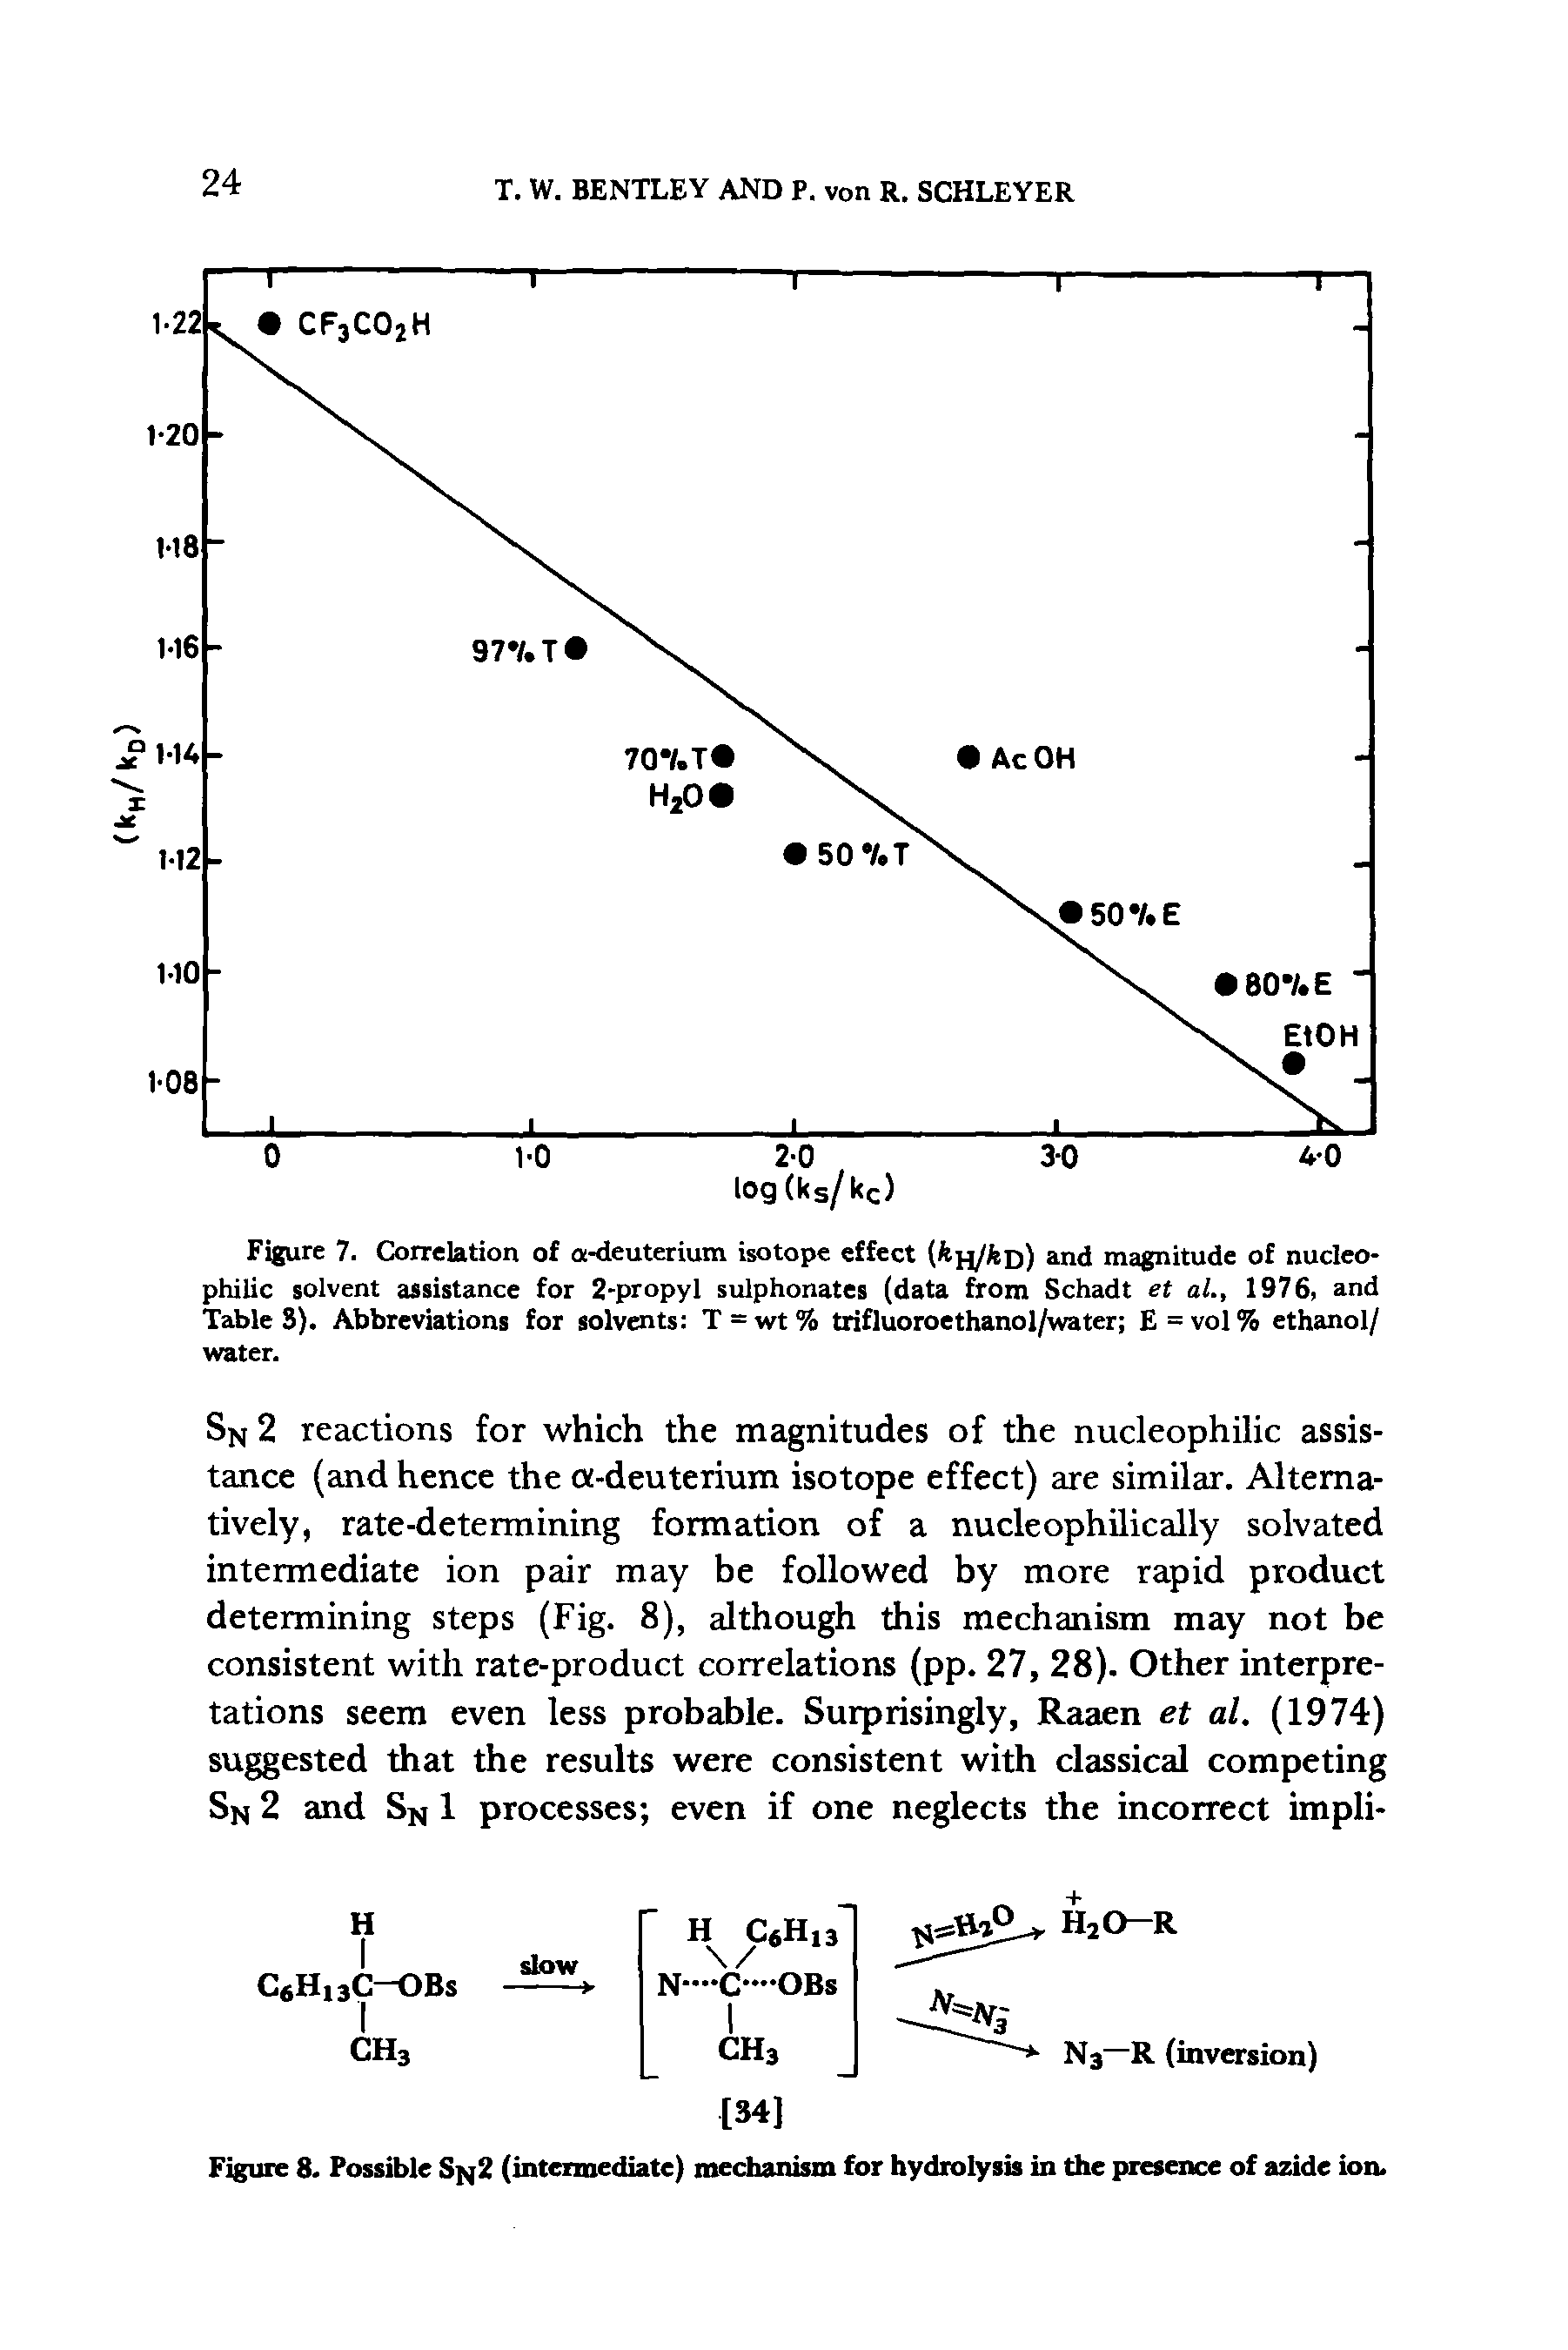 Figure 7. Correlation of a-deuterium isotope effect (Ah/ D) and magnitude of nucleophilic solvent assistance for 2-propyl sulphonates (data from Schadt et al., 1976, and TableS). Abbreviations for solvents T = wt% trifluoroethanol/water E=vol% ethanol/ water.